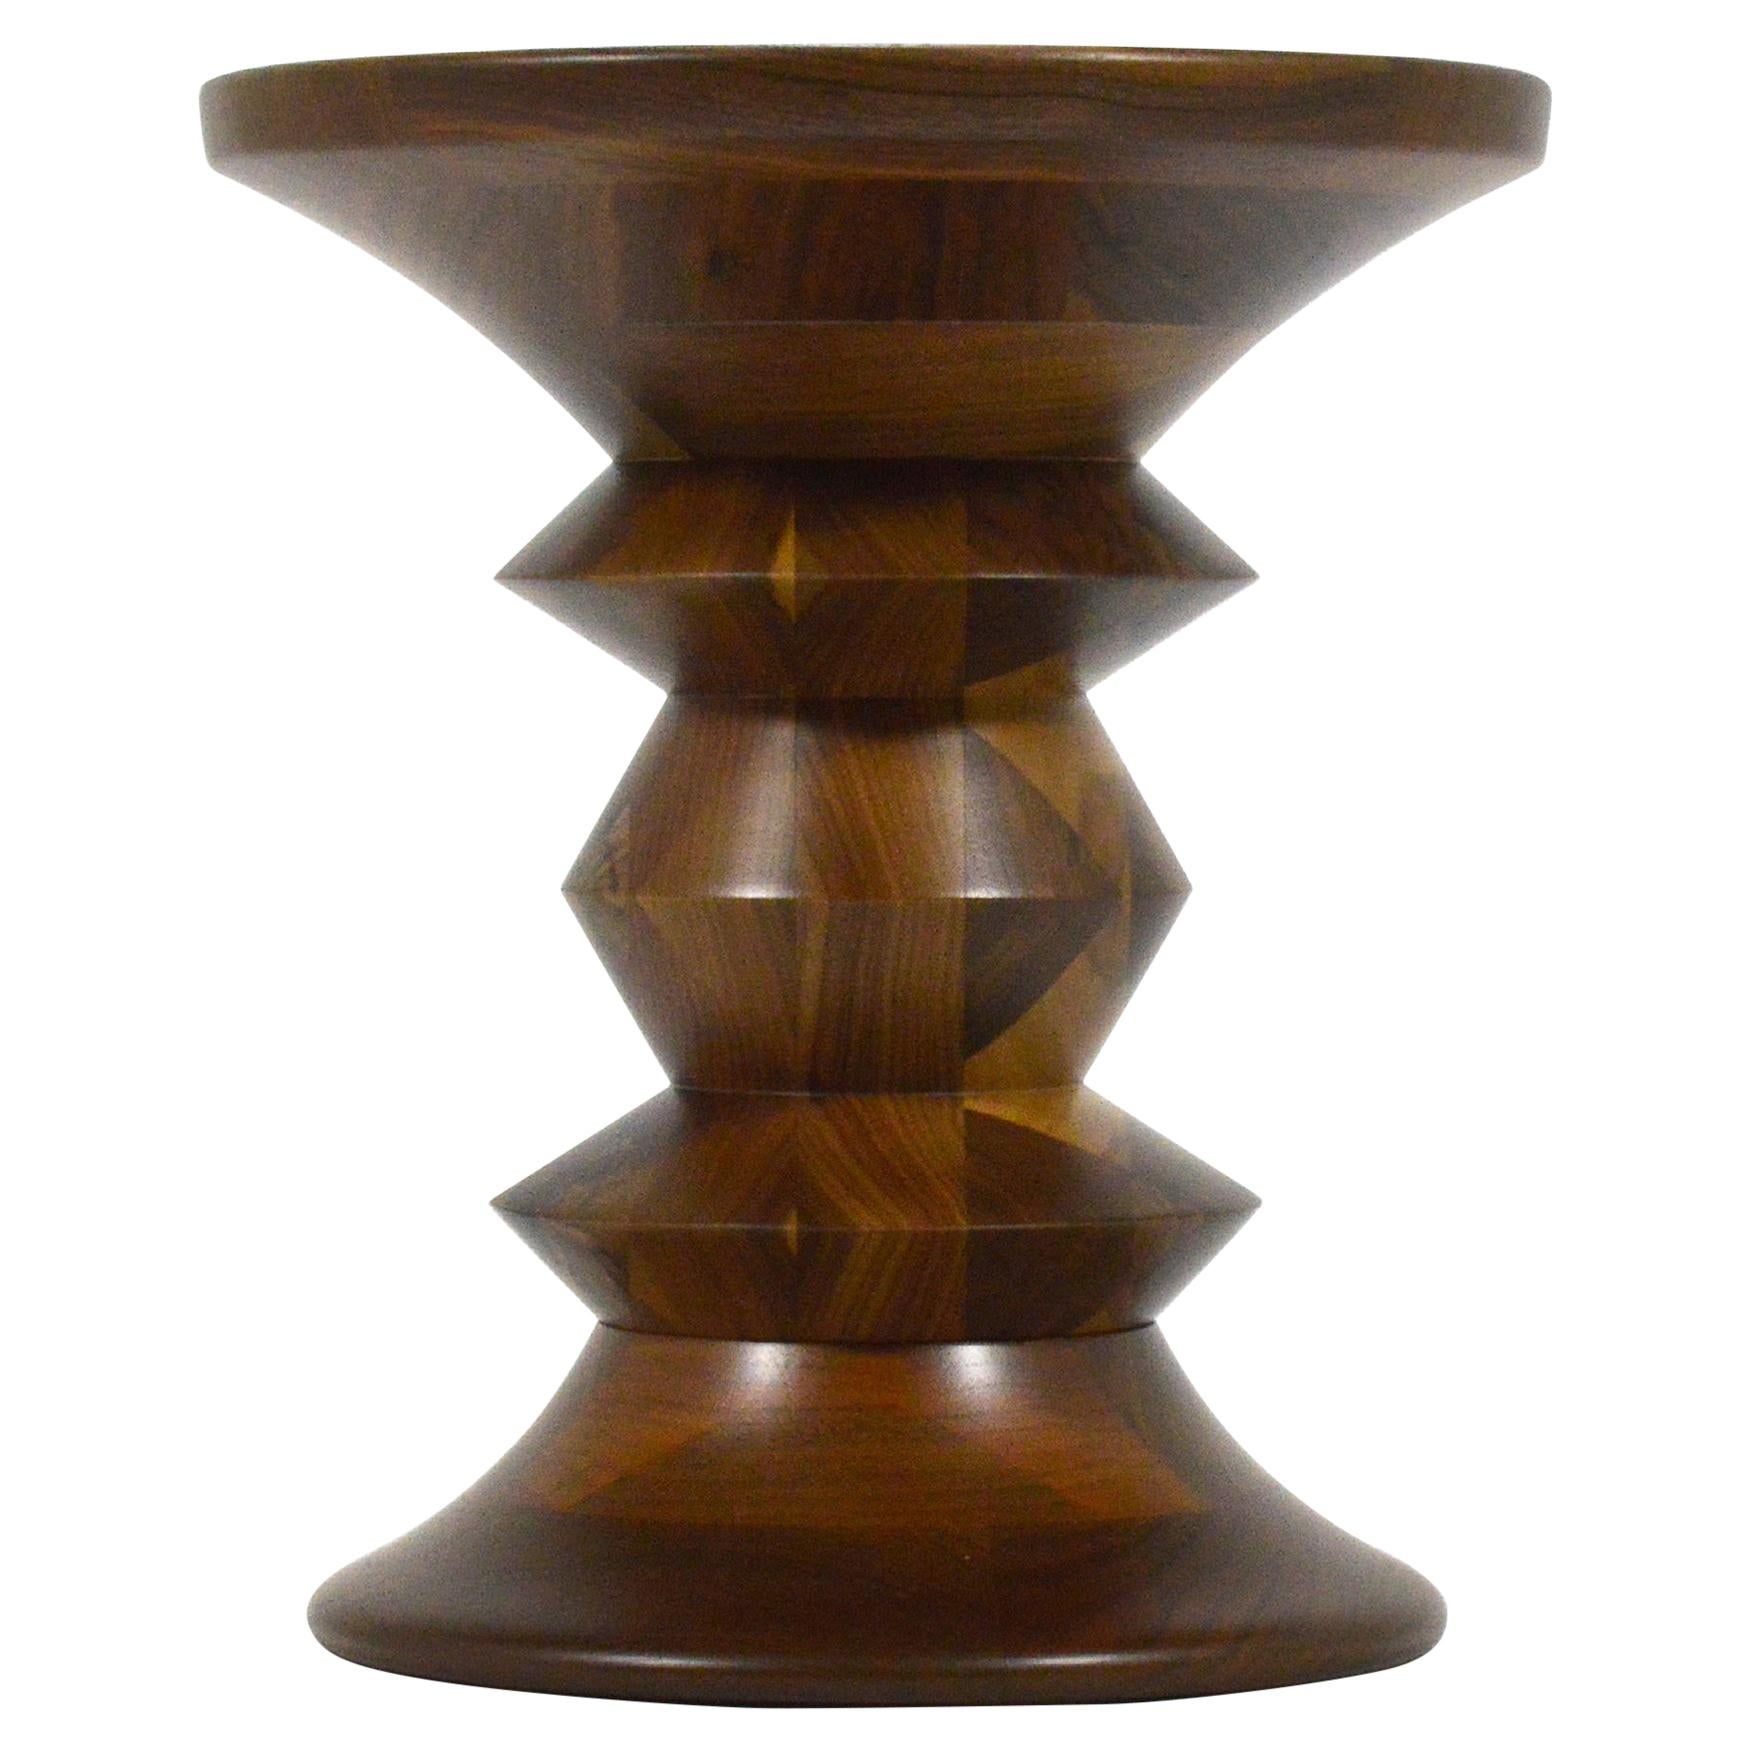 Eames Time-Life Walnut Stool by Herman Miller